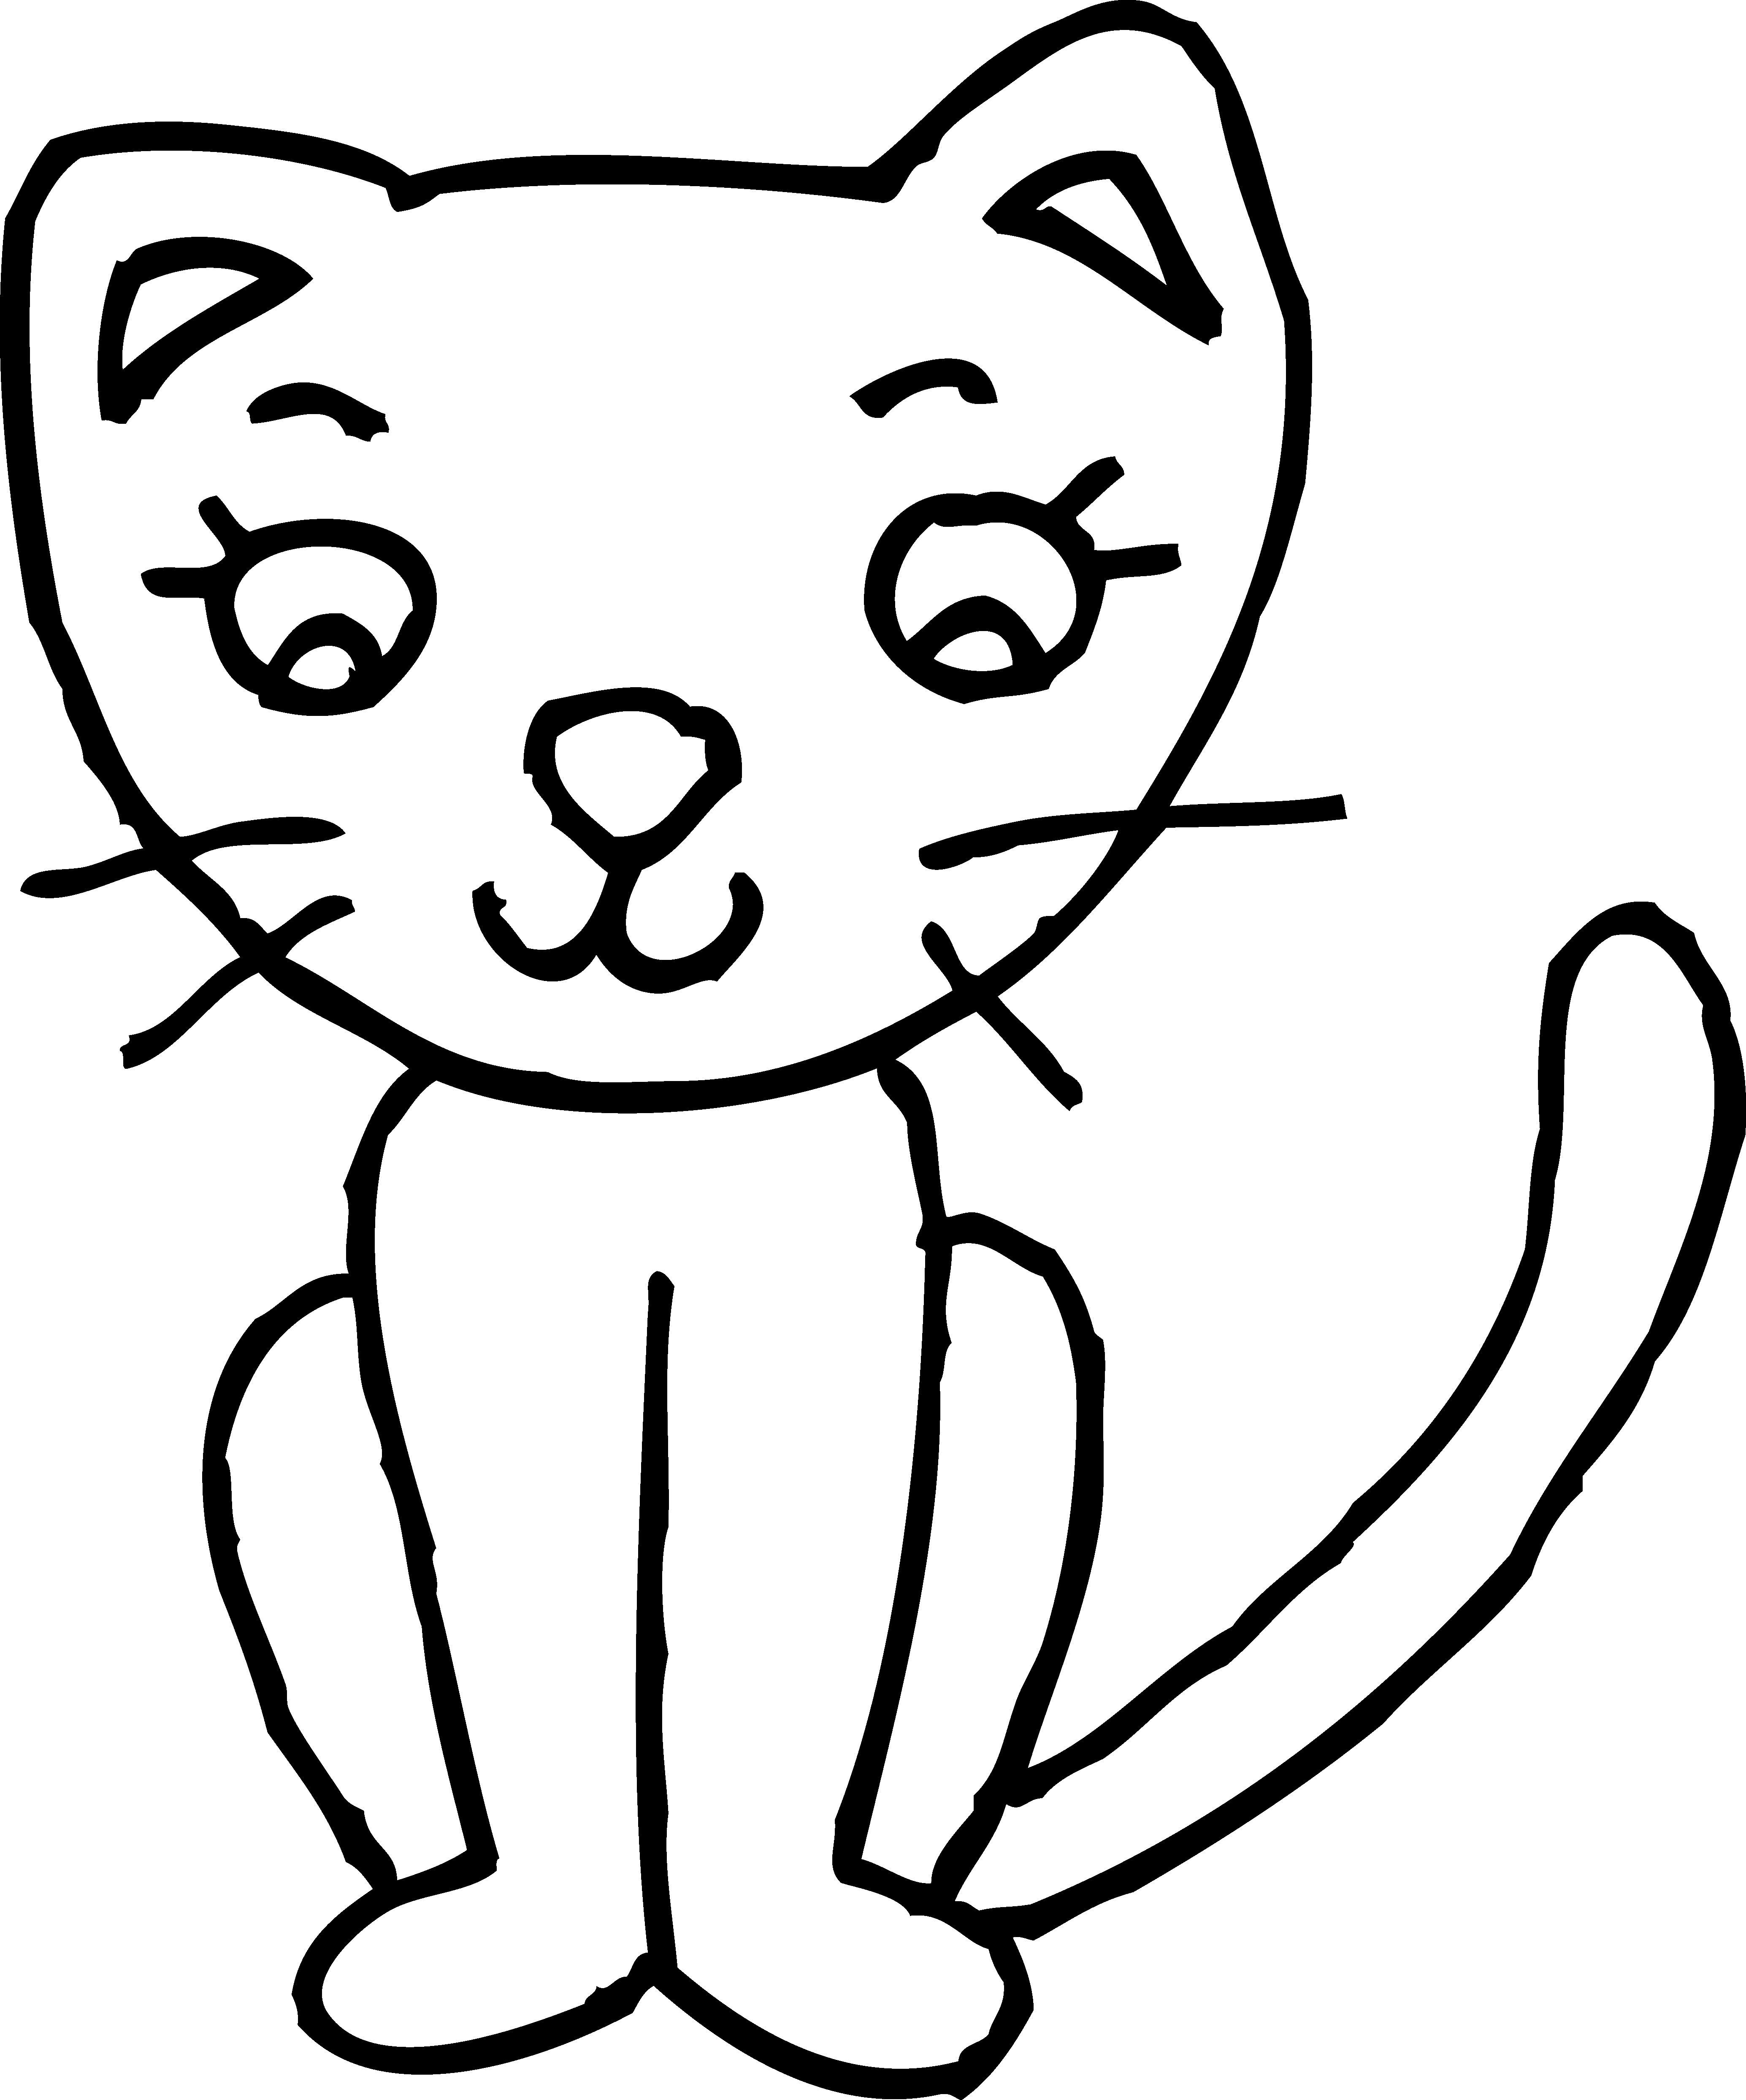 Free Cat Clipart Black And White, Download Free Cat Clipart Black And